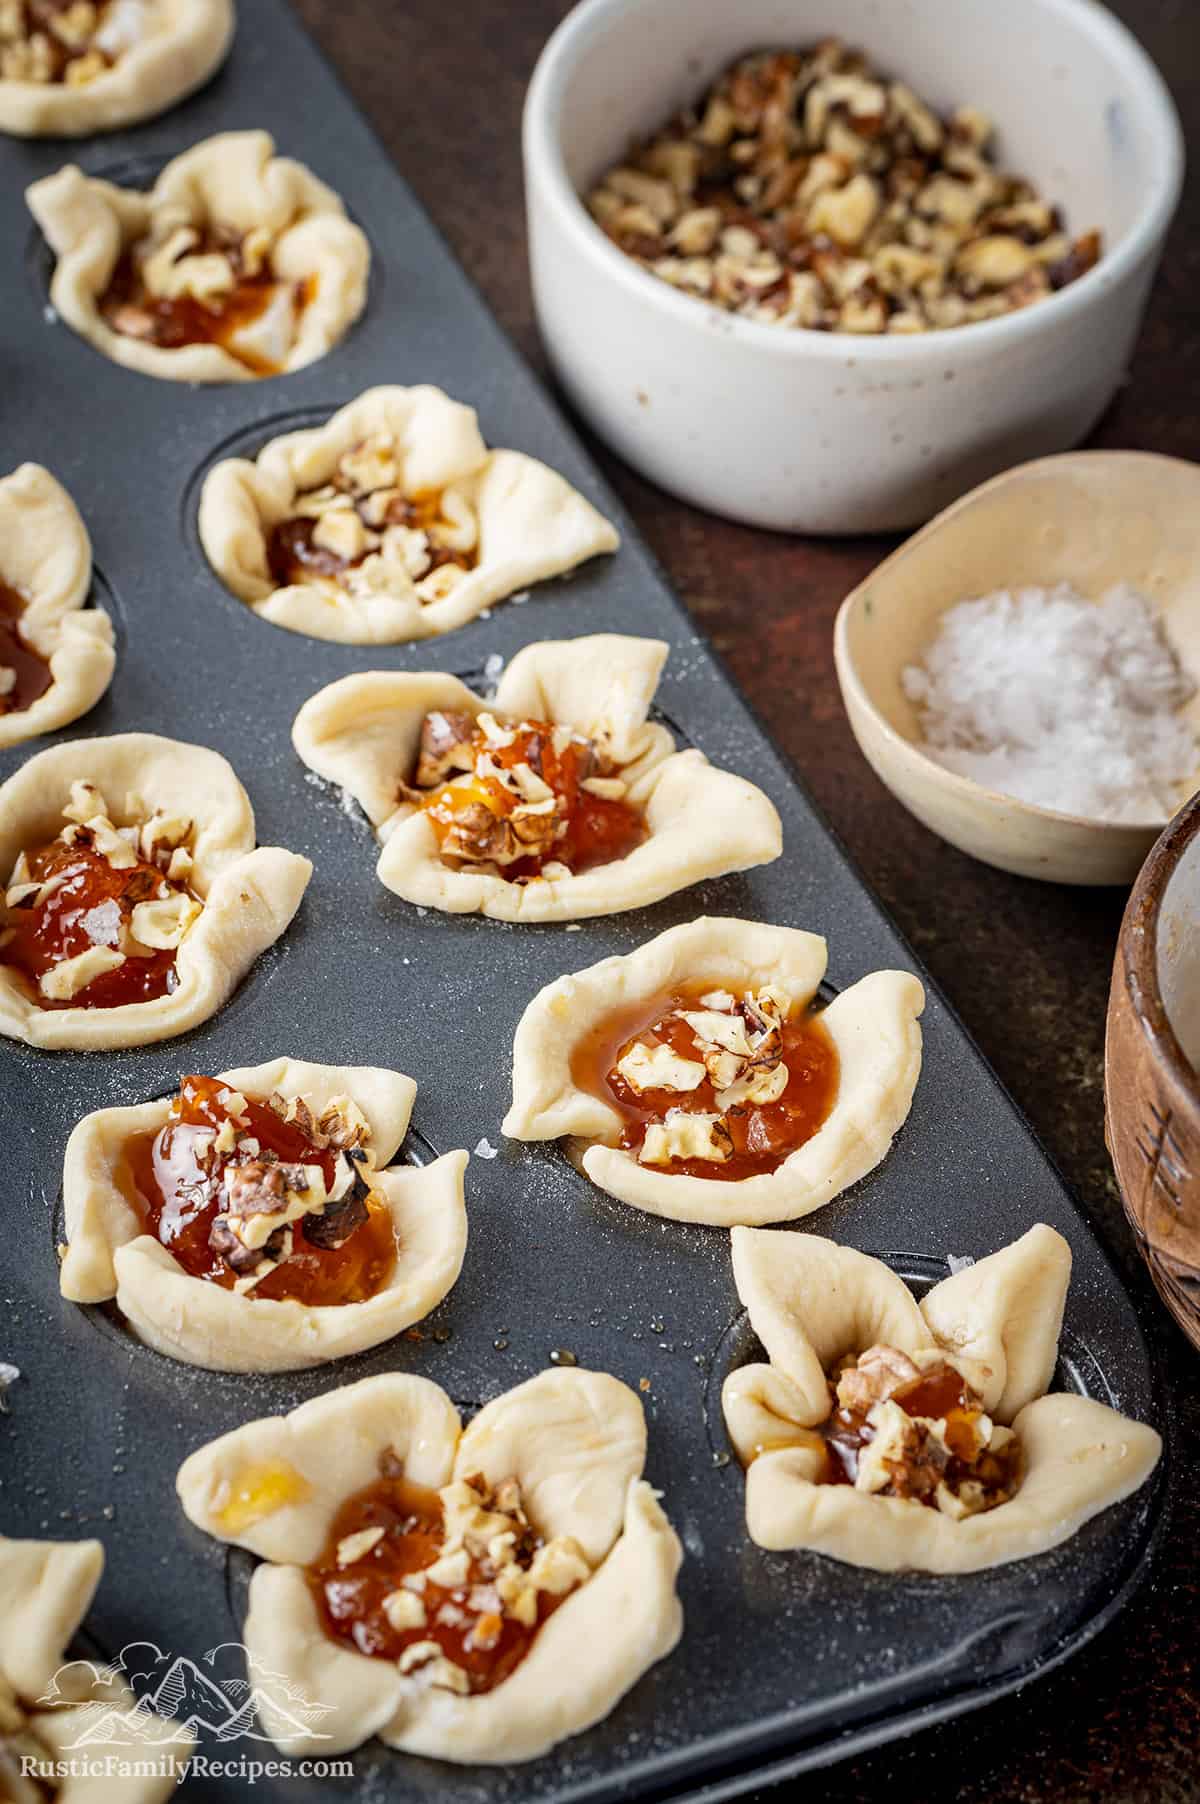 Apricot brie bites before baking next to salt and walnuts